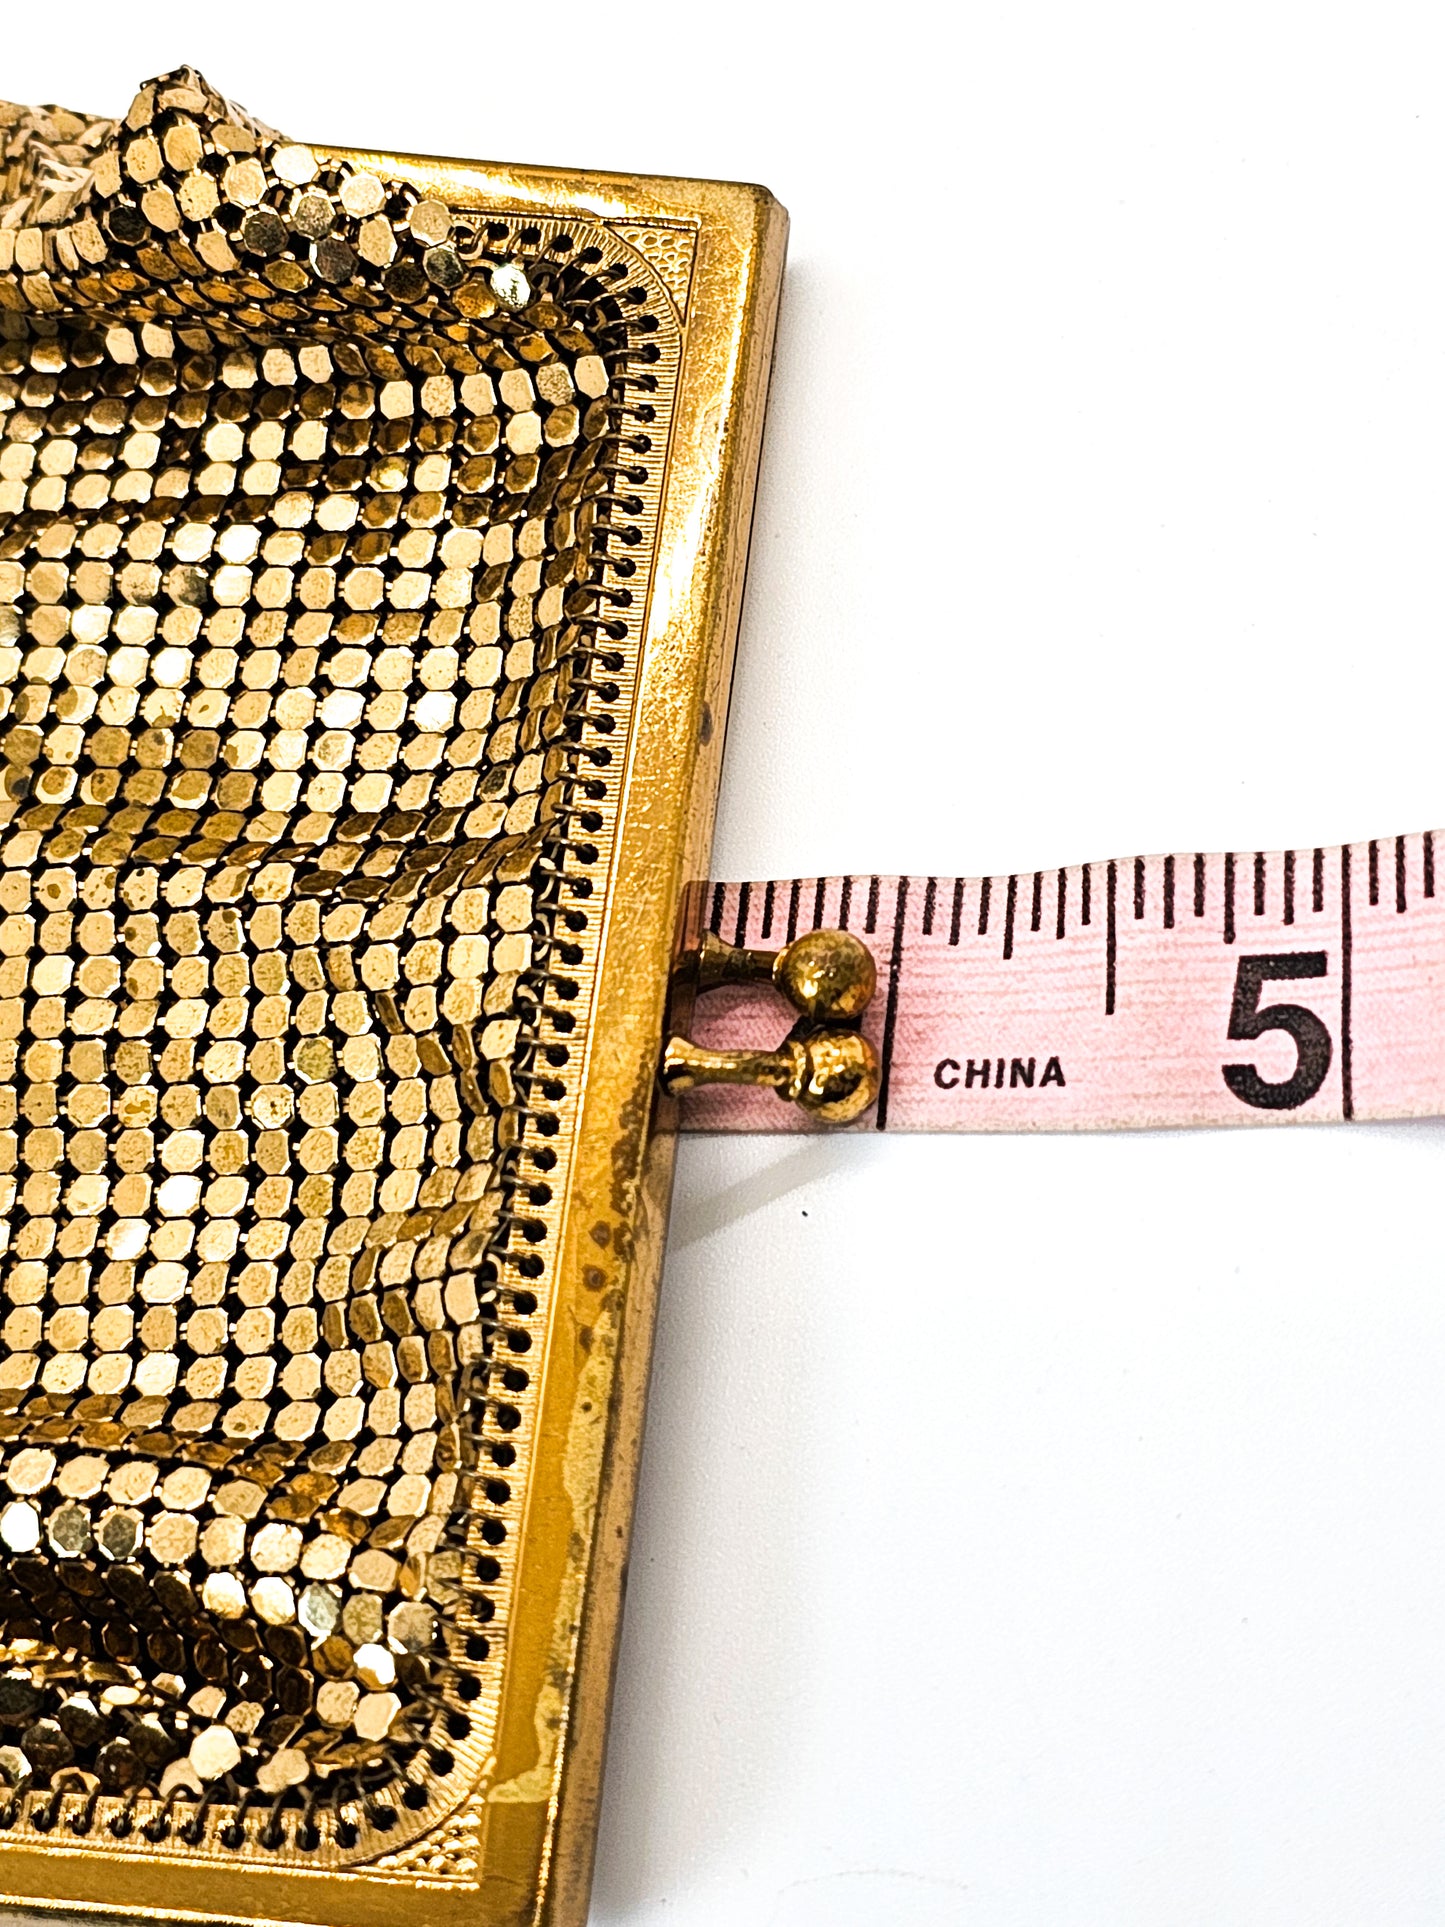 Whiting and Davis mid century vintage gold mesh metal clutch purse 1950's